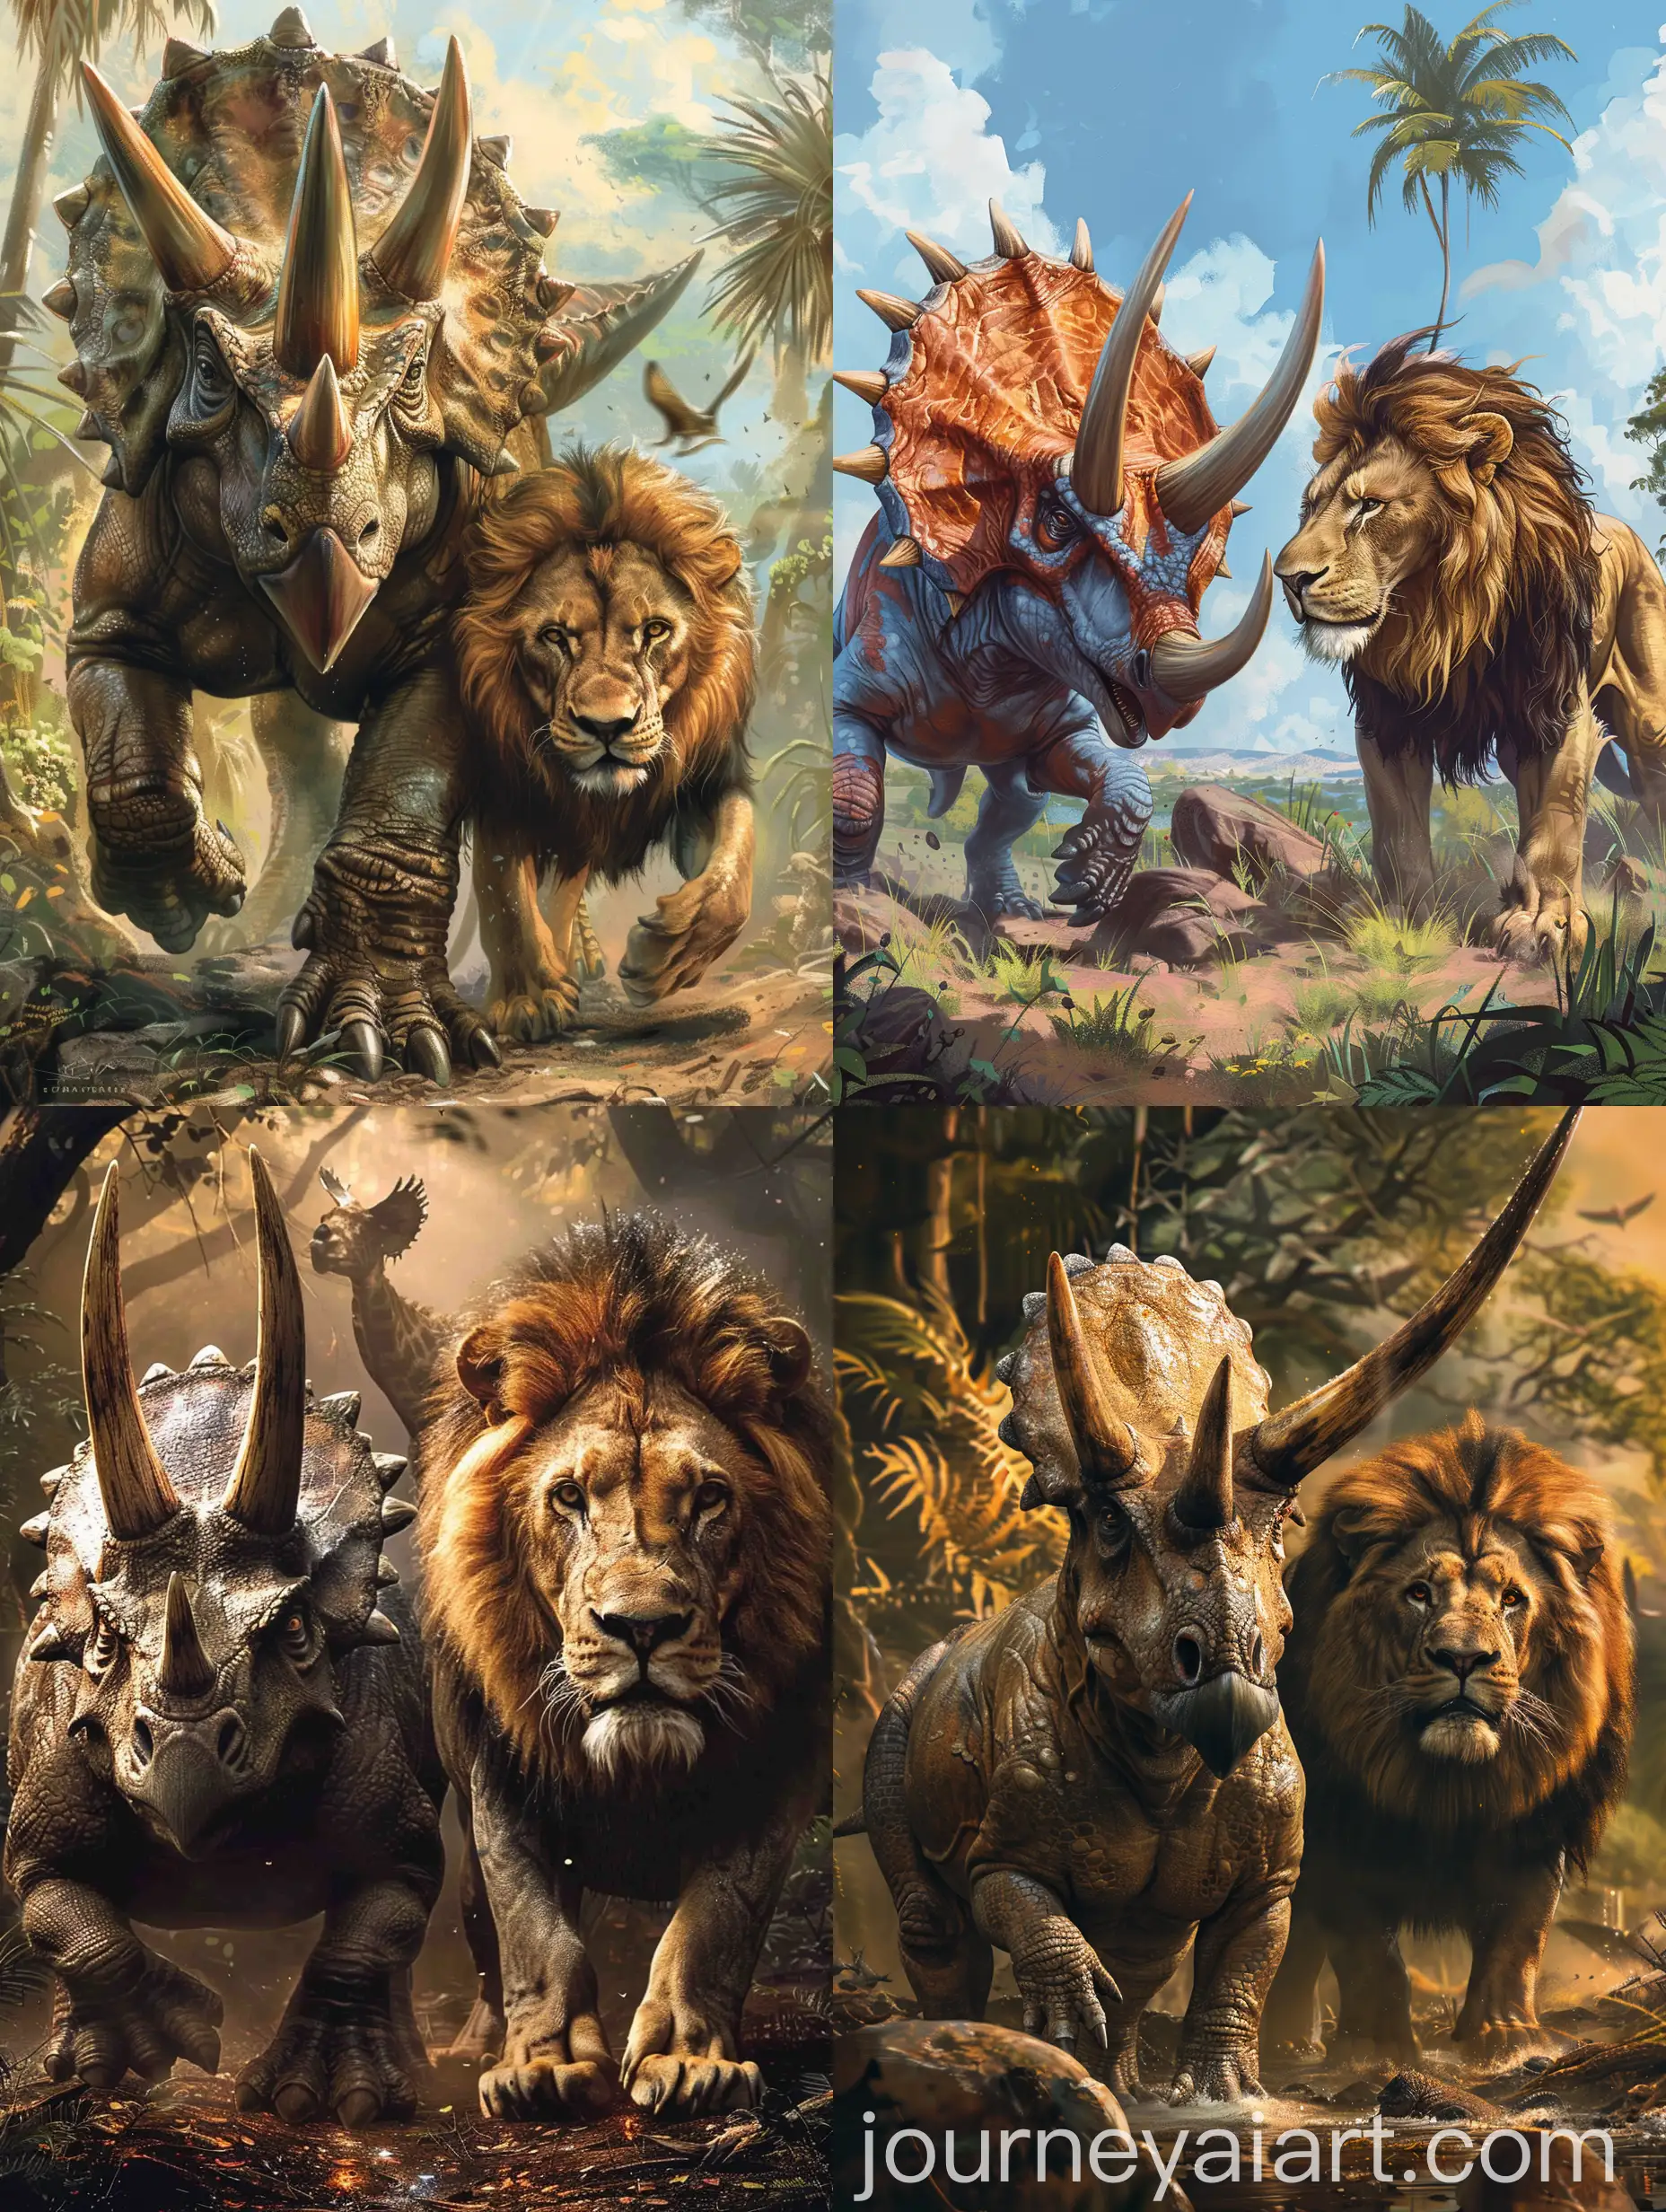 Triceratops-and-Lion-Side-by-Side-in-Prehistoric-Scene